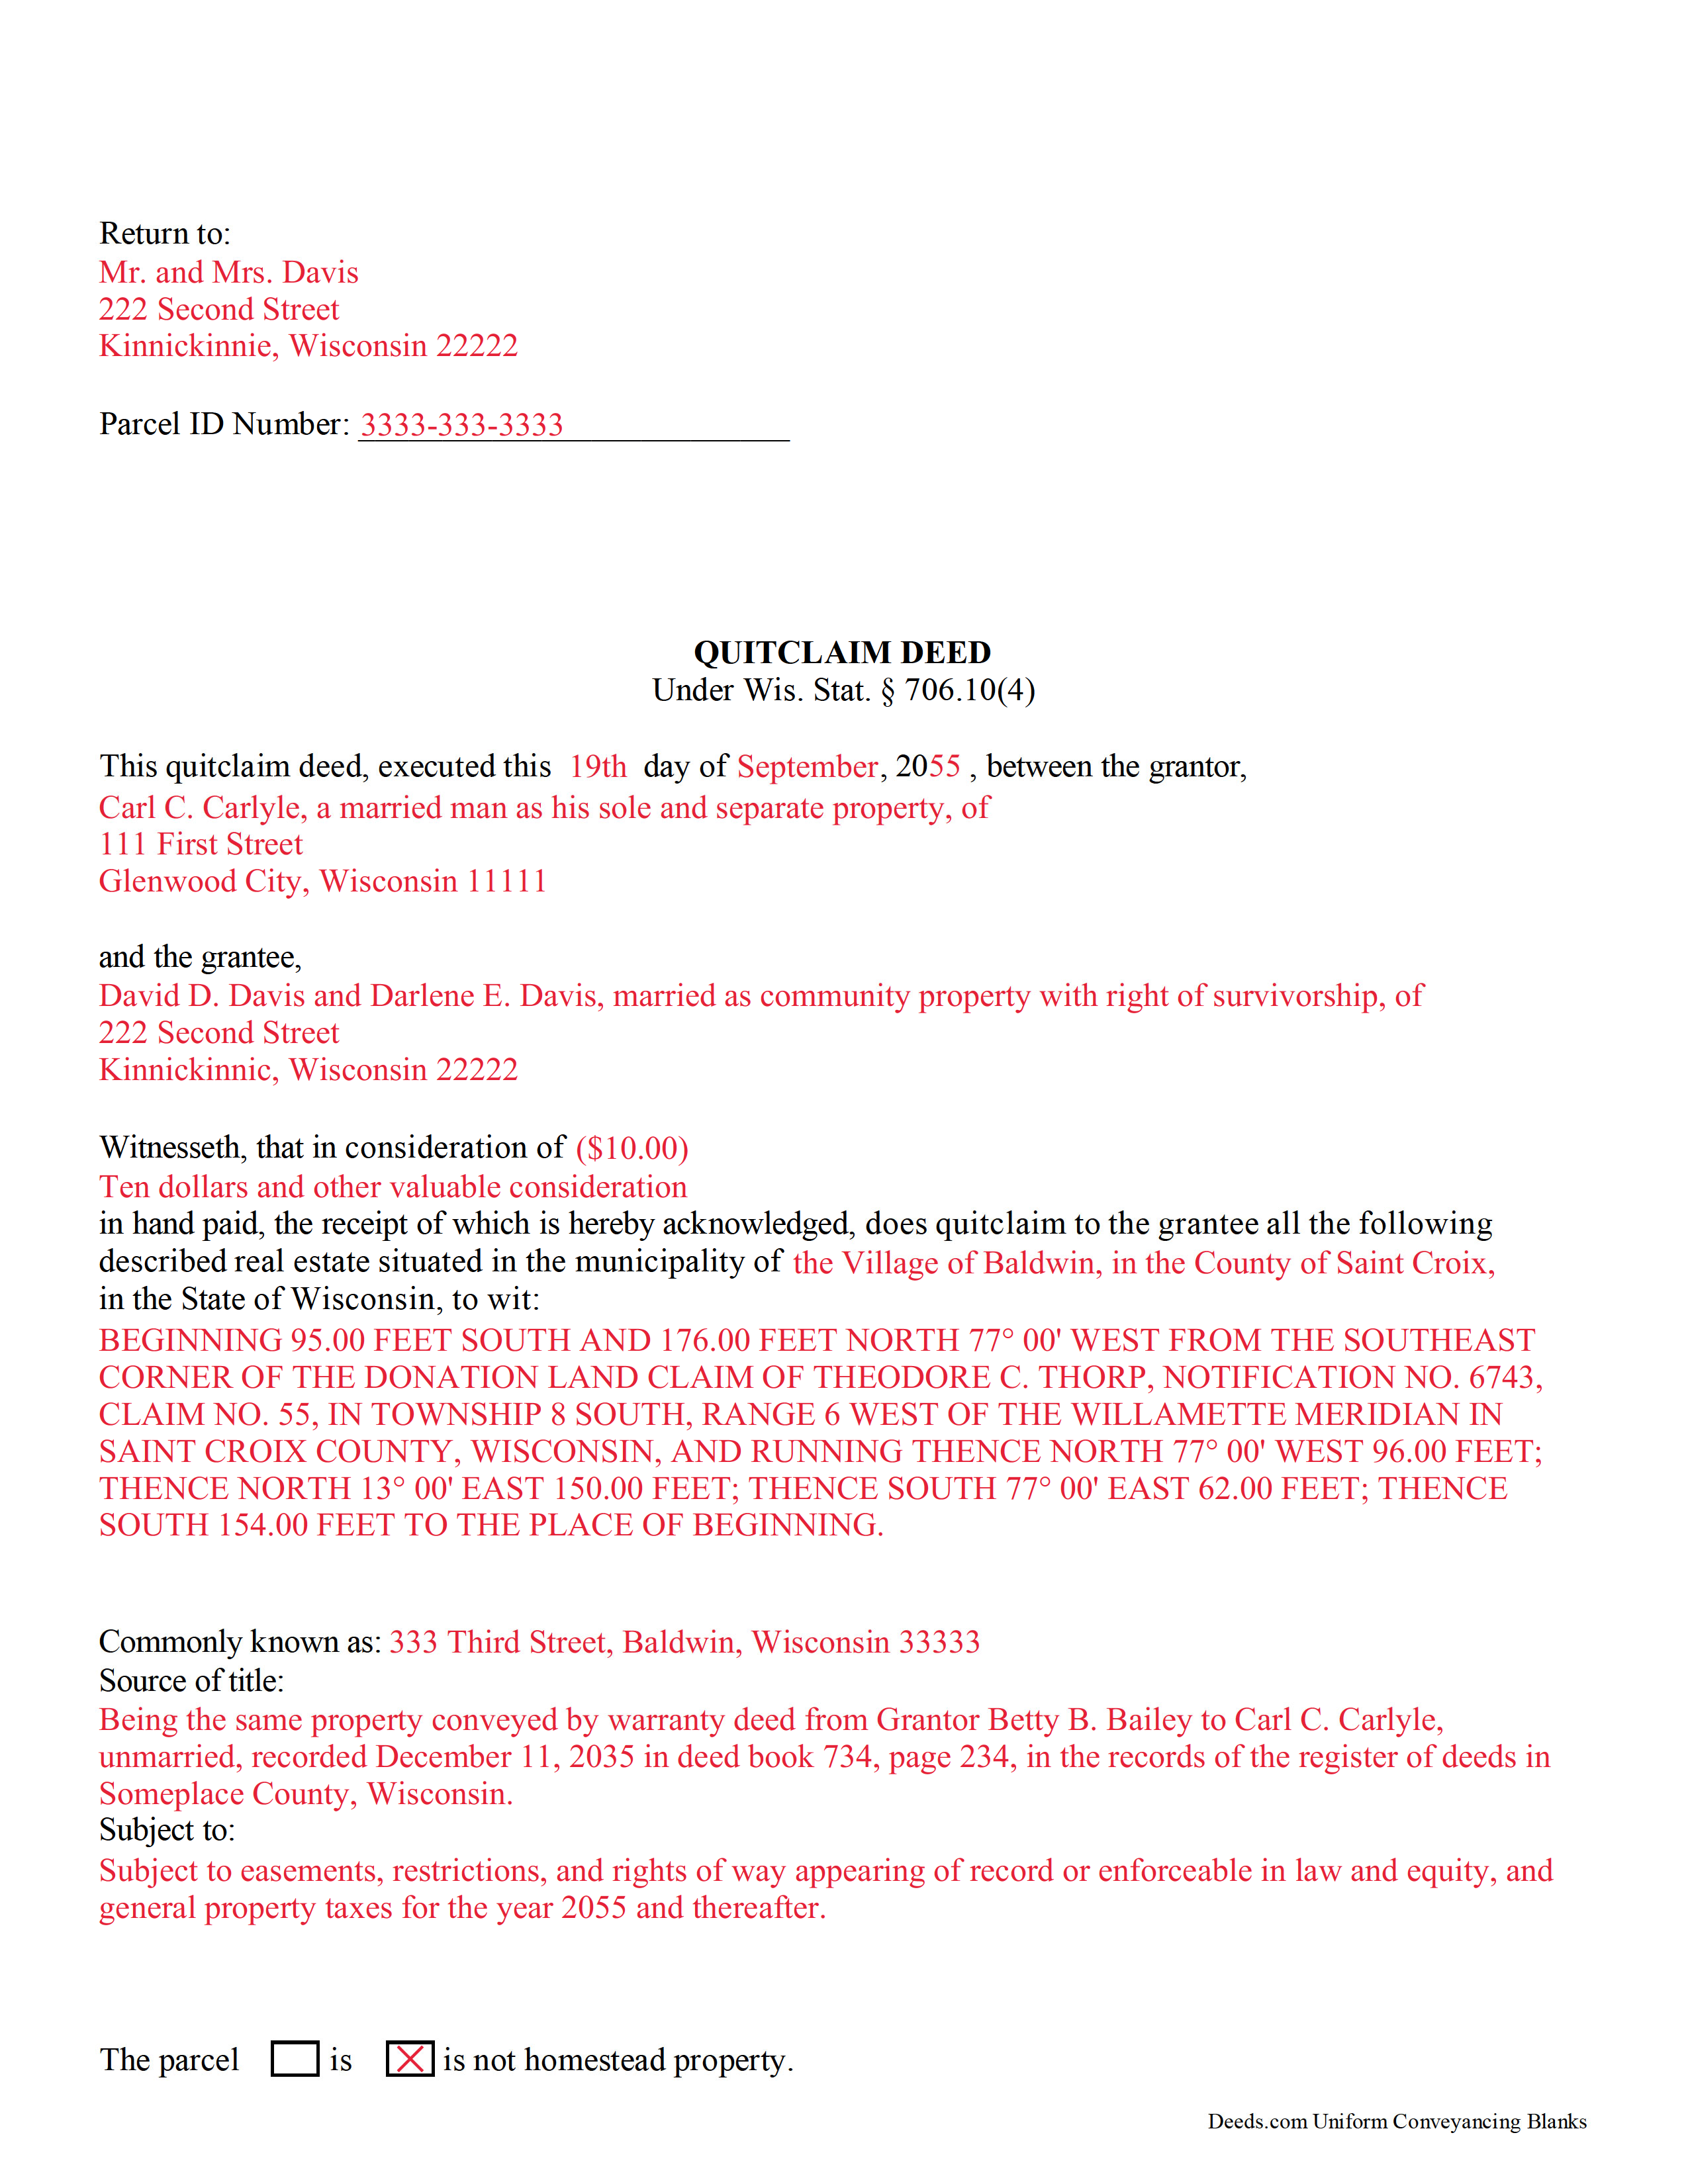 Completed Example of the Quitclaim Deed Document